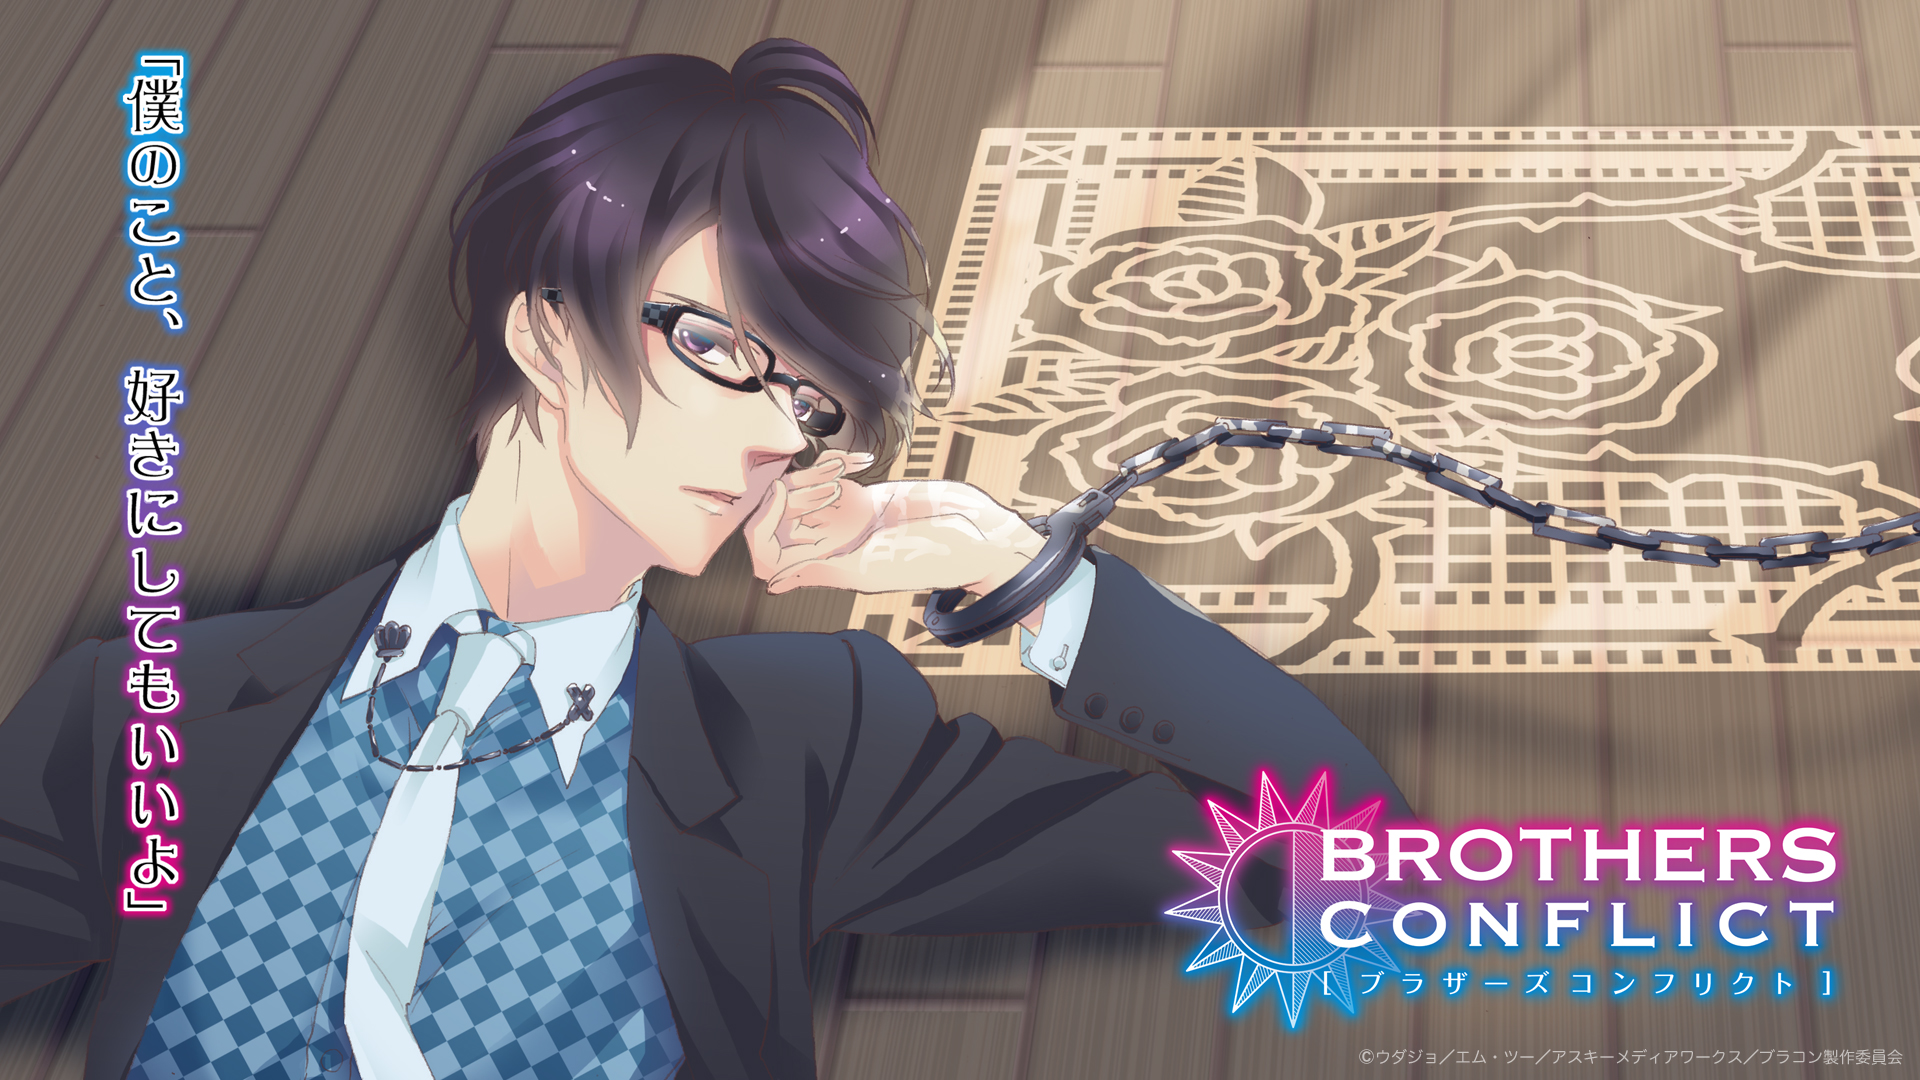 Otome Games ♡ Images Brothers Conflict Hd Wallpaper - Brother Conflict Azusa Game , HD Wallpaper & Backgrounds